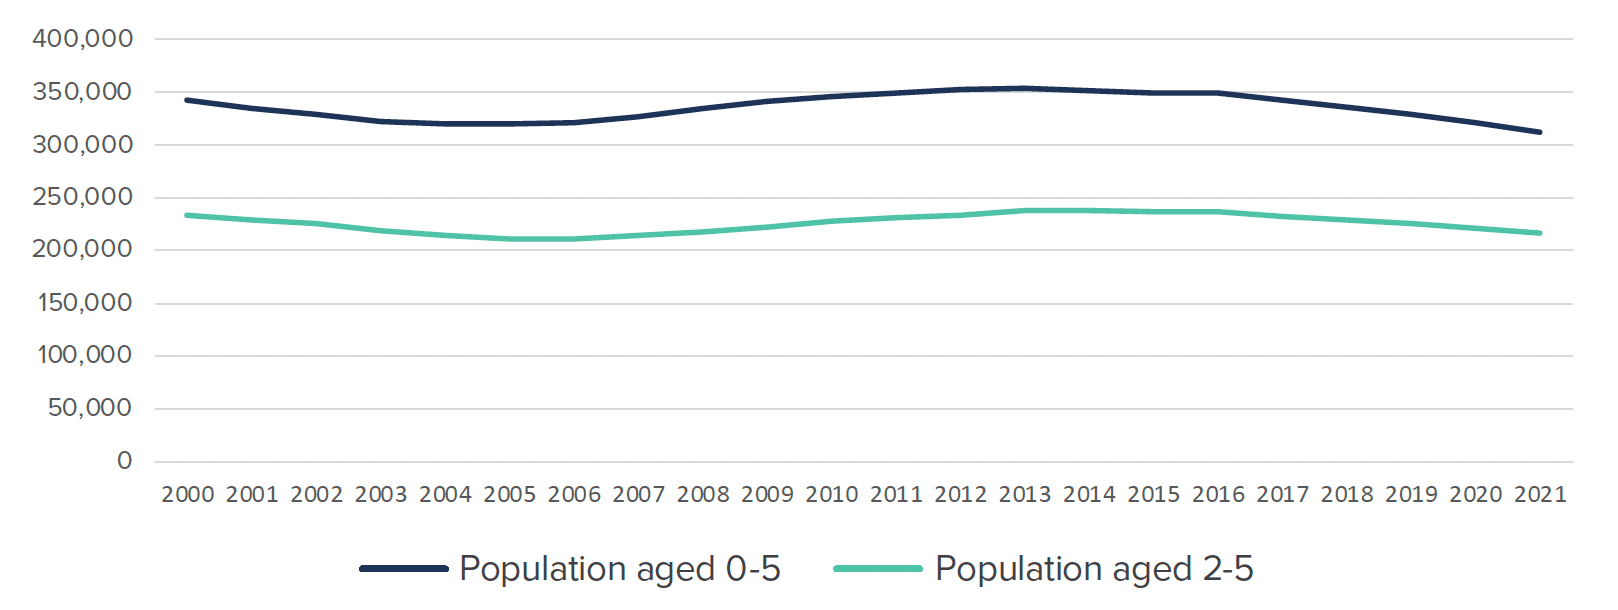 Line graph showing a decrease in the child population in Scotland between 2000 and 2021